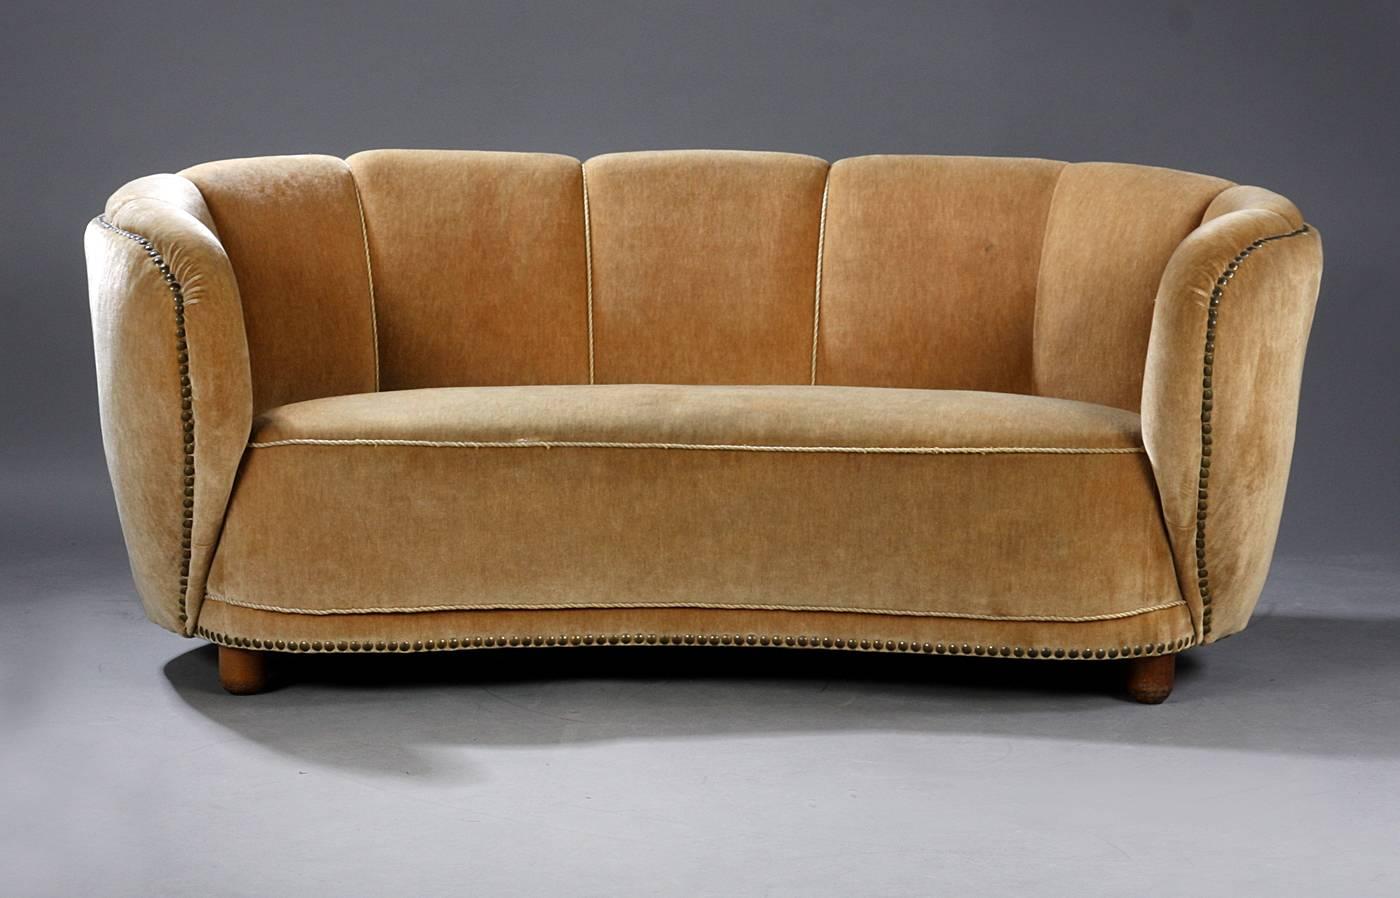 Banana shaped curved sofa in the style of Viggo Boesen and Fritz Hansen, made in Denmark, 1940s. We are happy to reupholster in customer supplied fabric. 
 
  